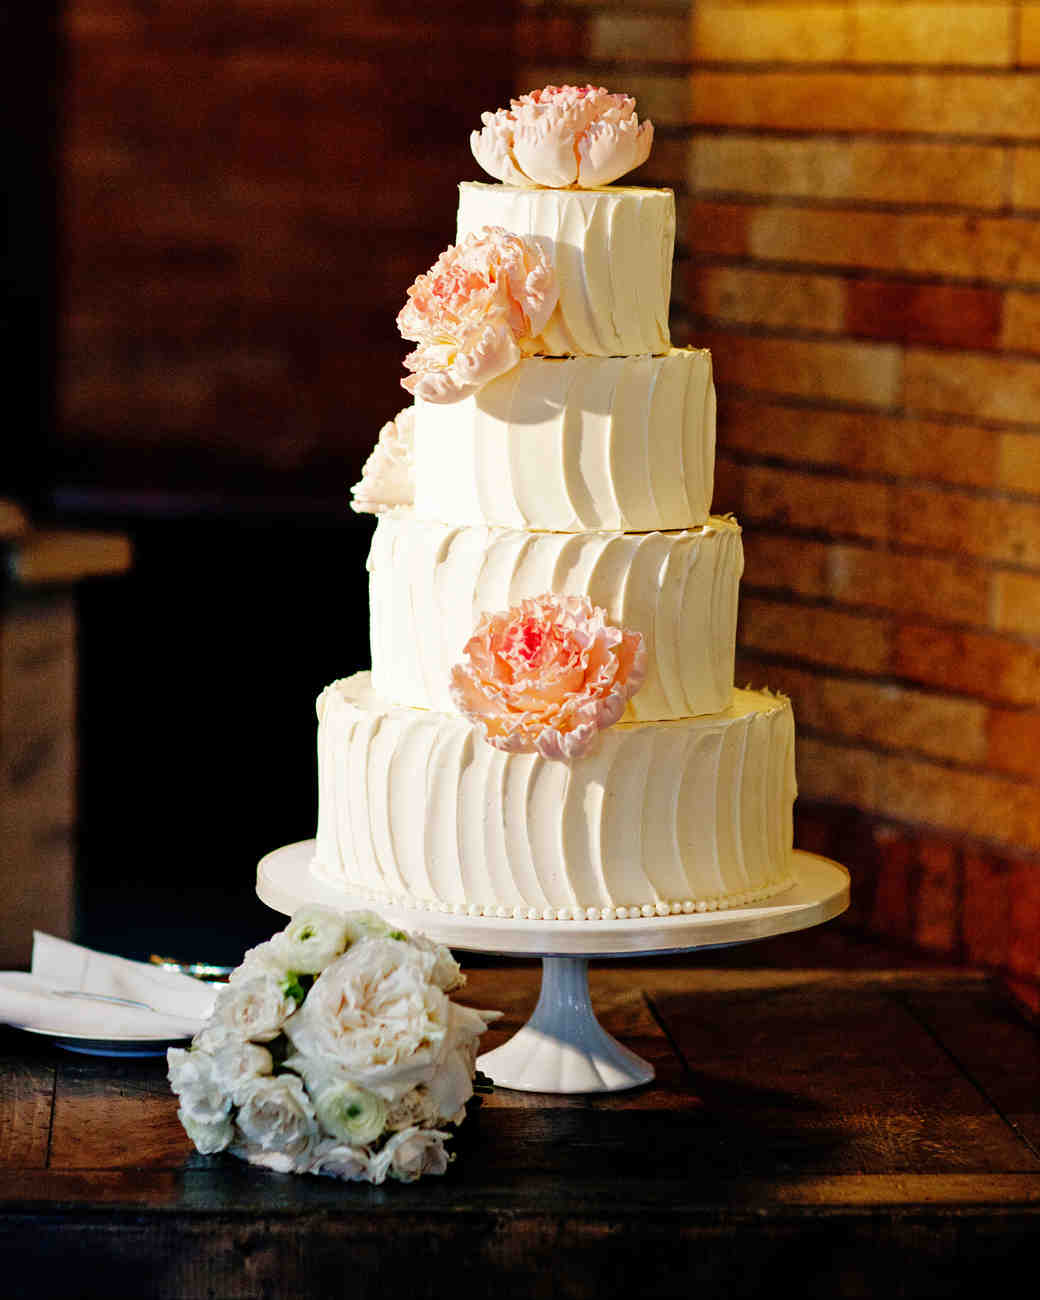 45 Wedding Cakes With Sugar Flowers That Look Stunningly ...